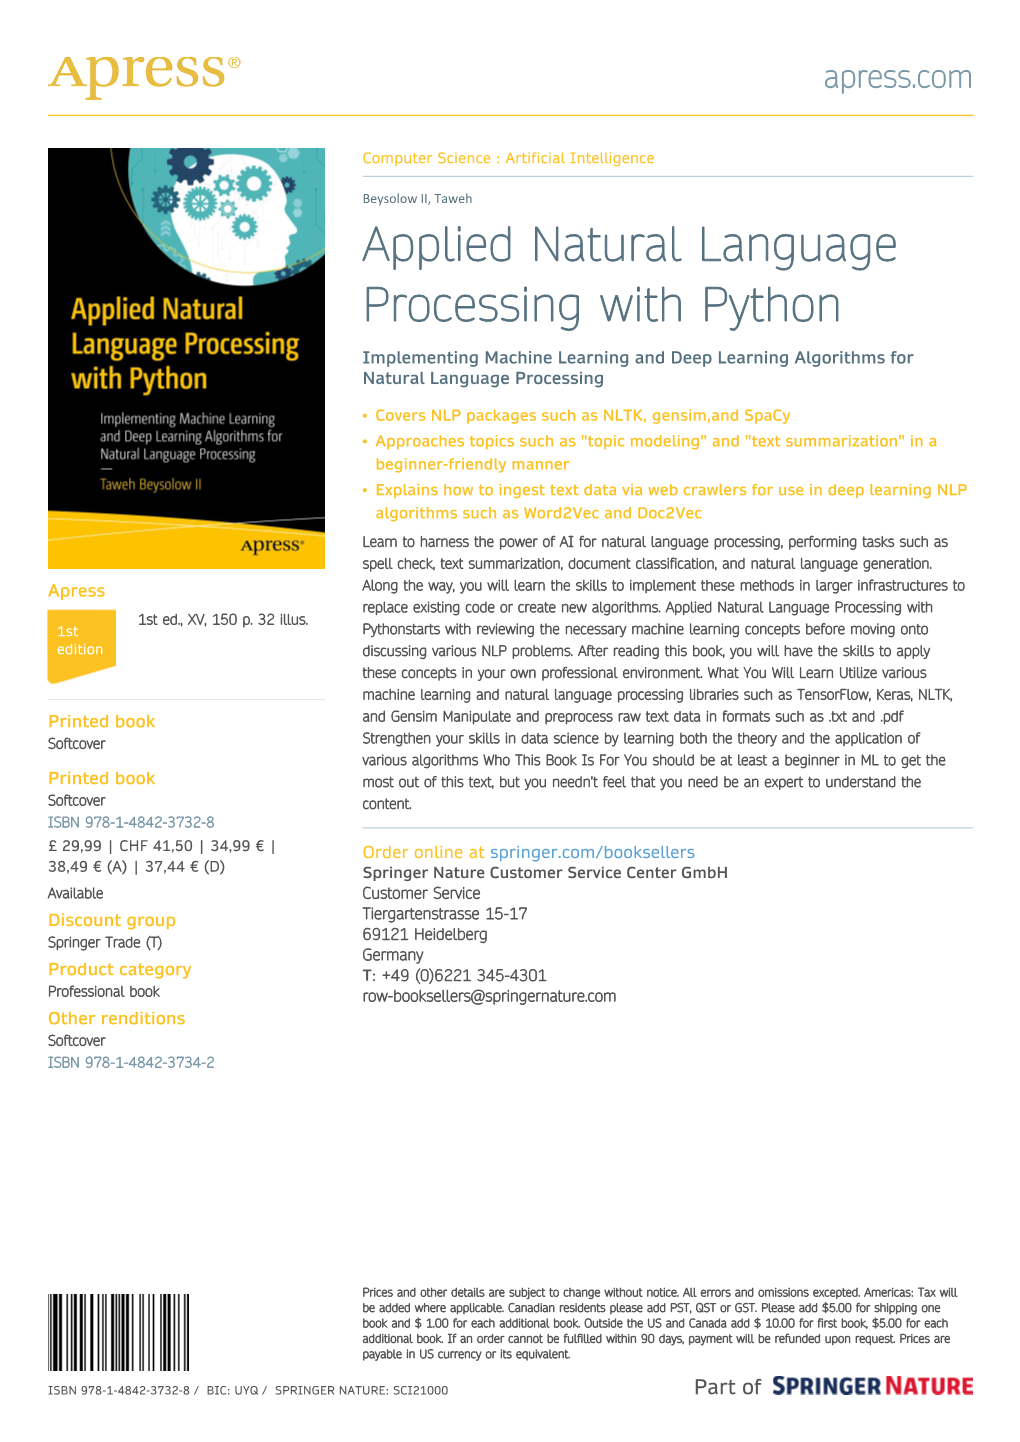 Applied Natural Language Processing with Python Implementing Machine Learning and Deep Learning Algorithms for Natural Language Processing